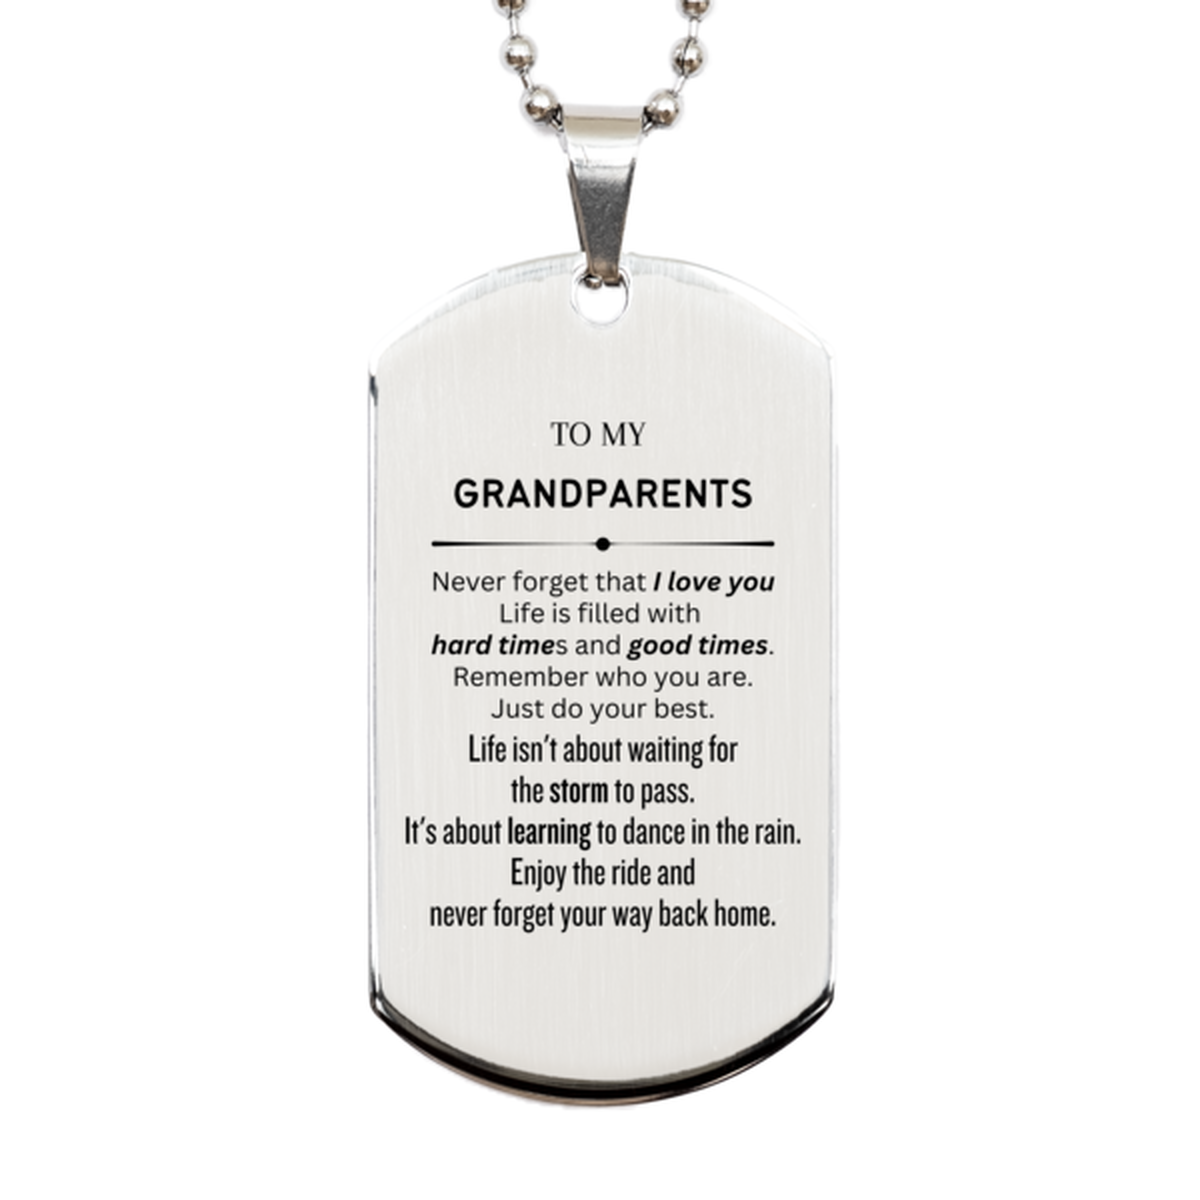 Christmas Grandparents Silver Dog Tag Gifts, To My Grandparents Birthday Thank You Gifts For Grandparents, Graduation Unique Gifts For Grandparents To My Grandparents Never forget that I love you life is filled with hard times and good times. Remember who